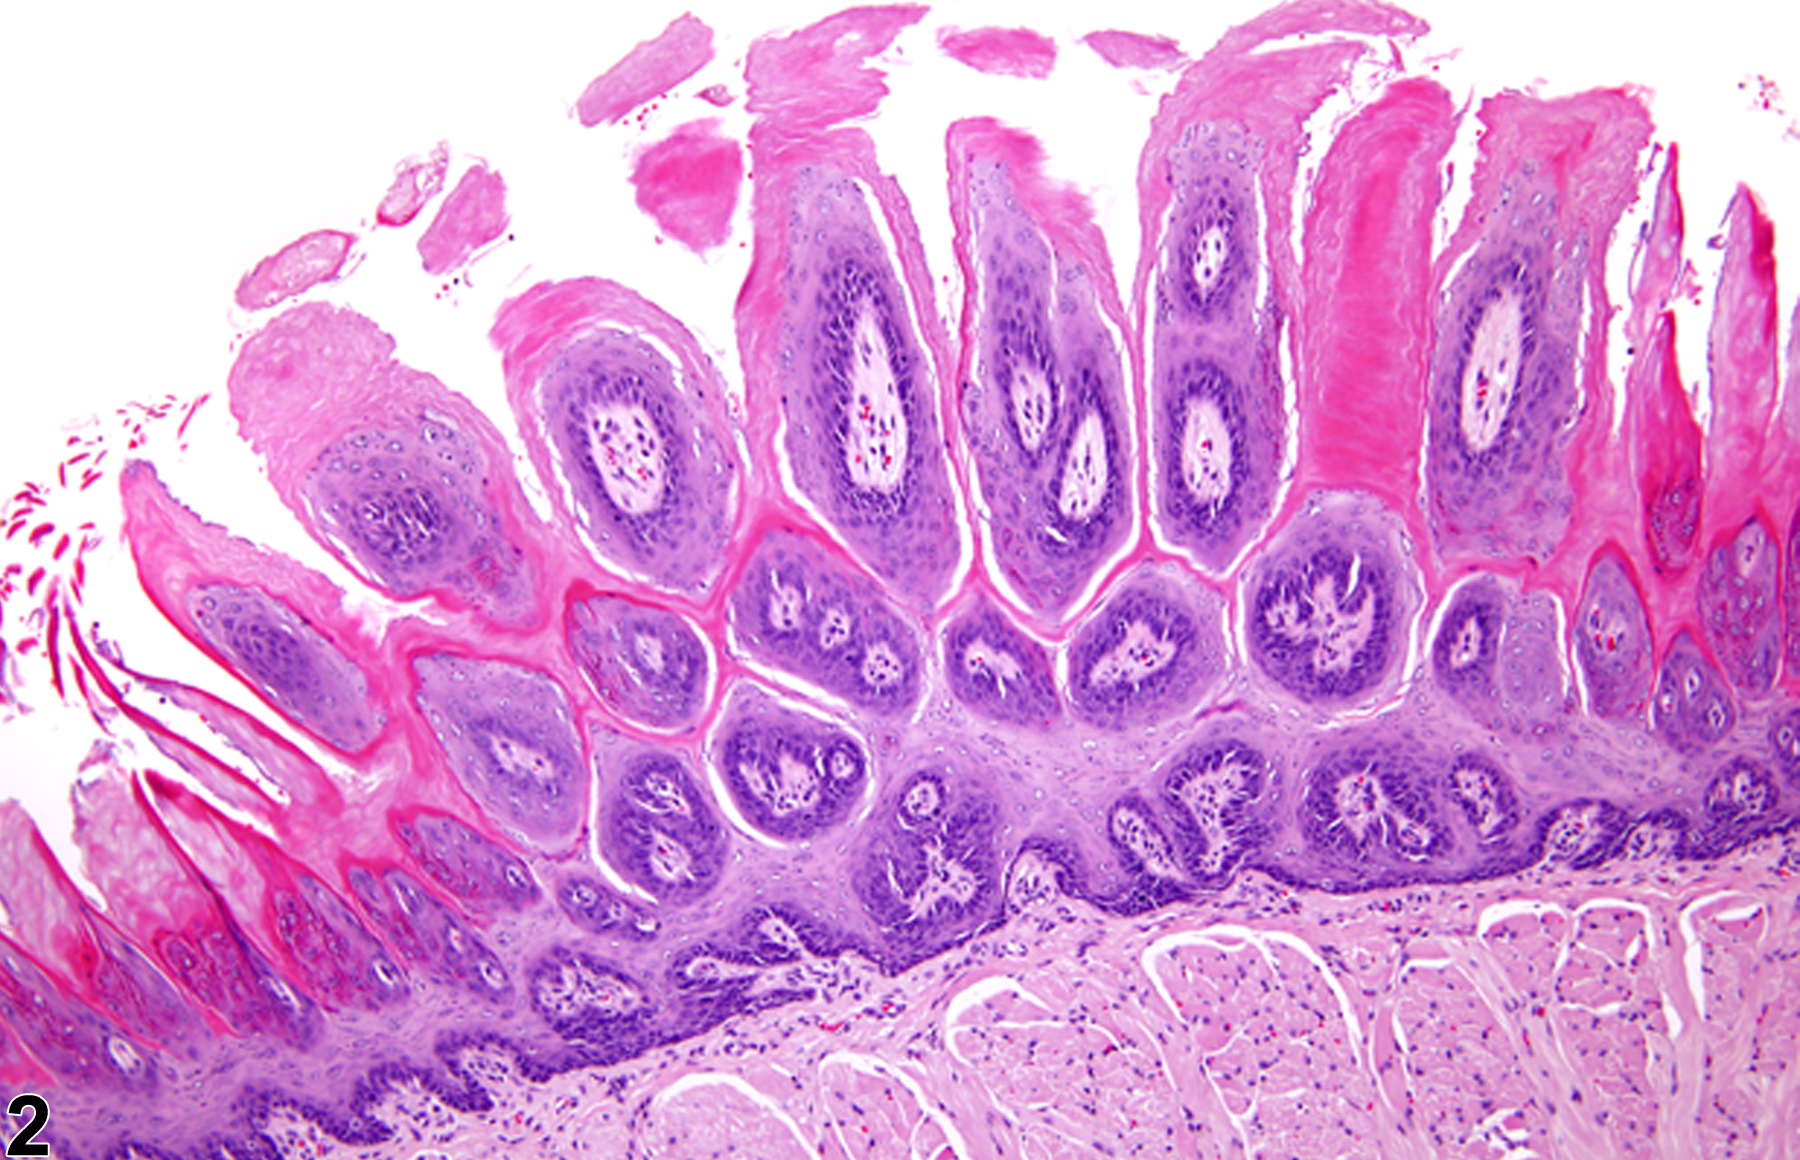 Image of hyperplasia (focal, diffuse) in the forestomach epithelium from a female F344/N rat in a chronic study